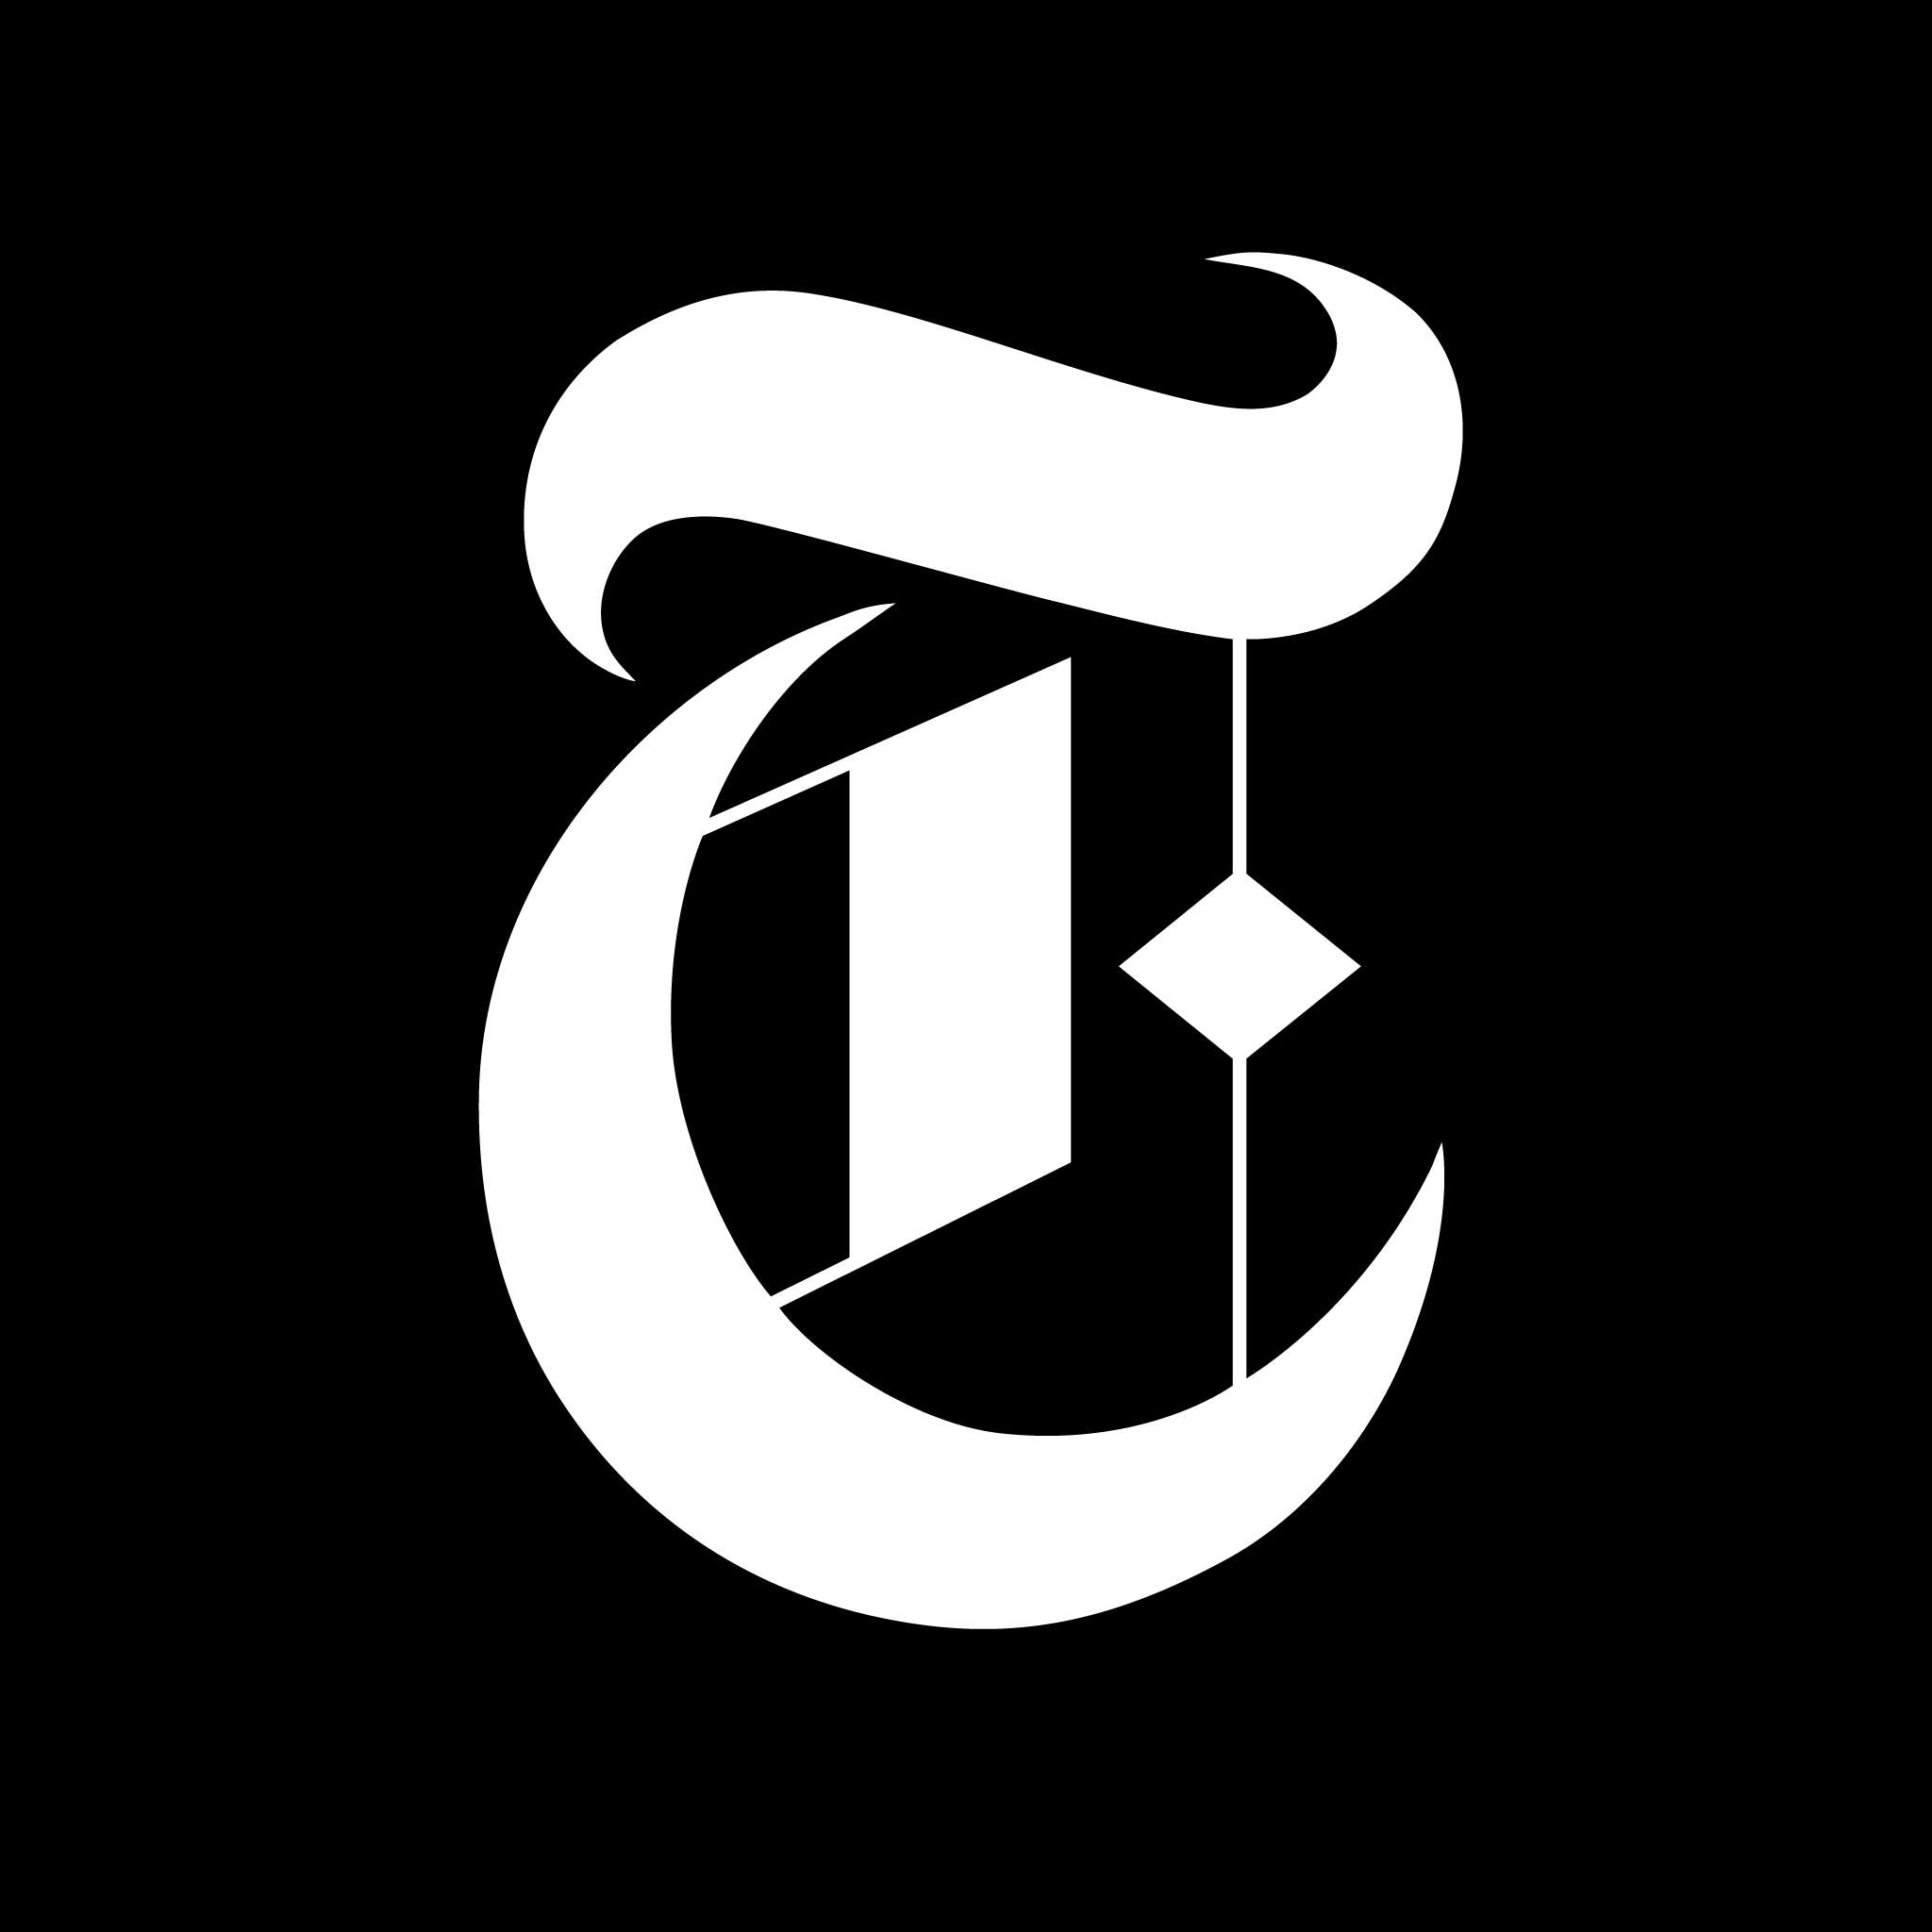 The New York Times - Crunchbase Company Profile & Funding